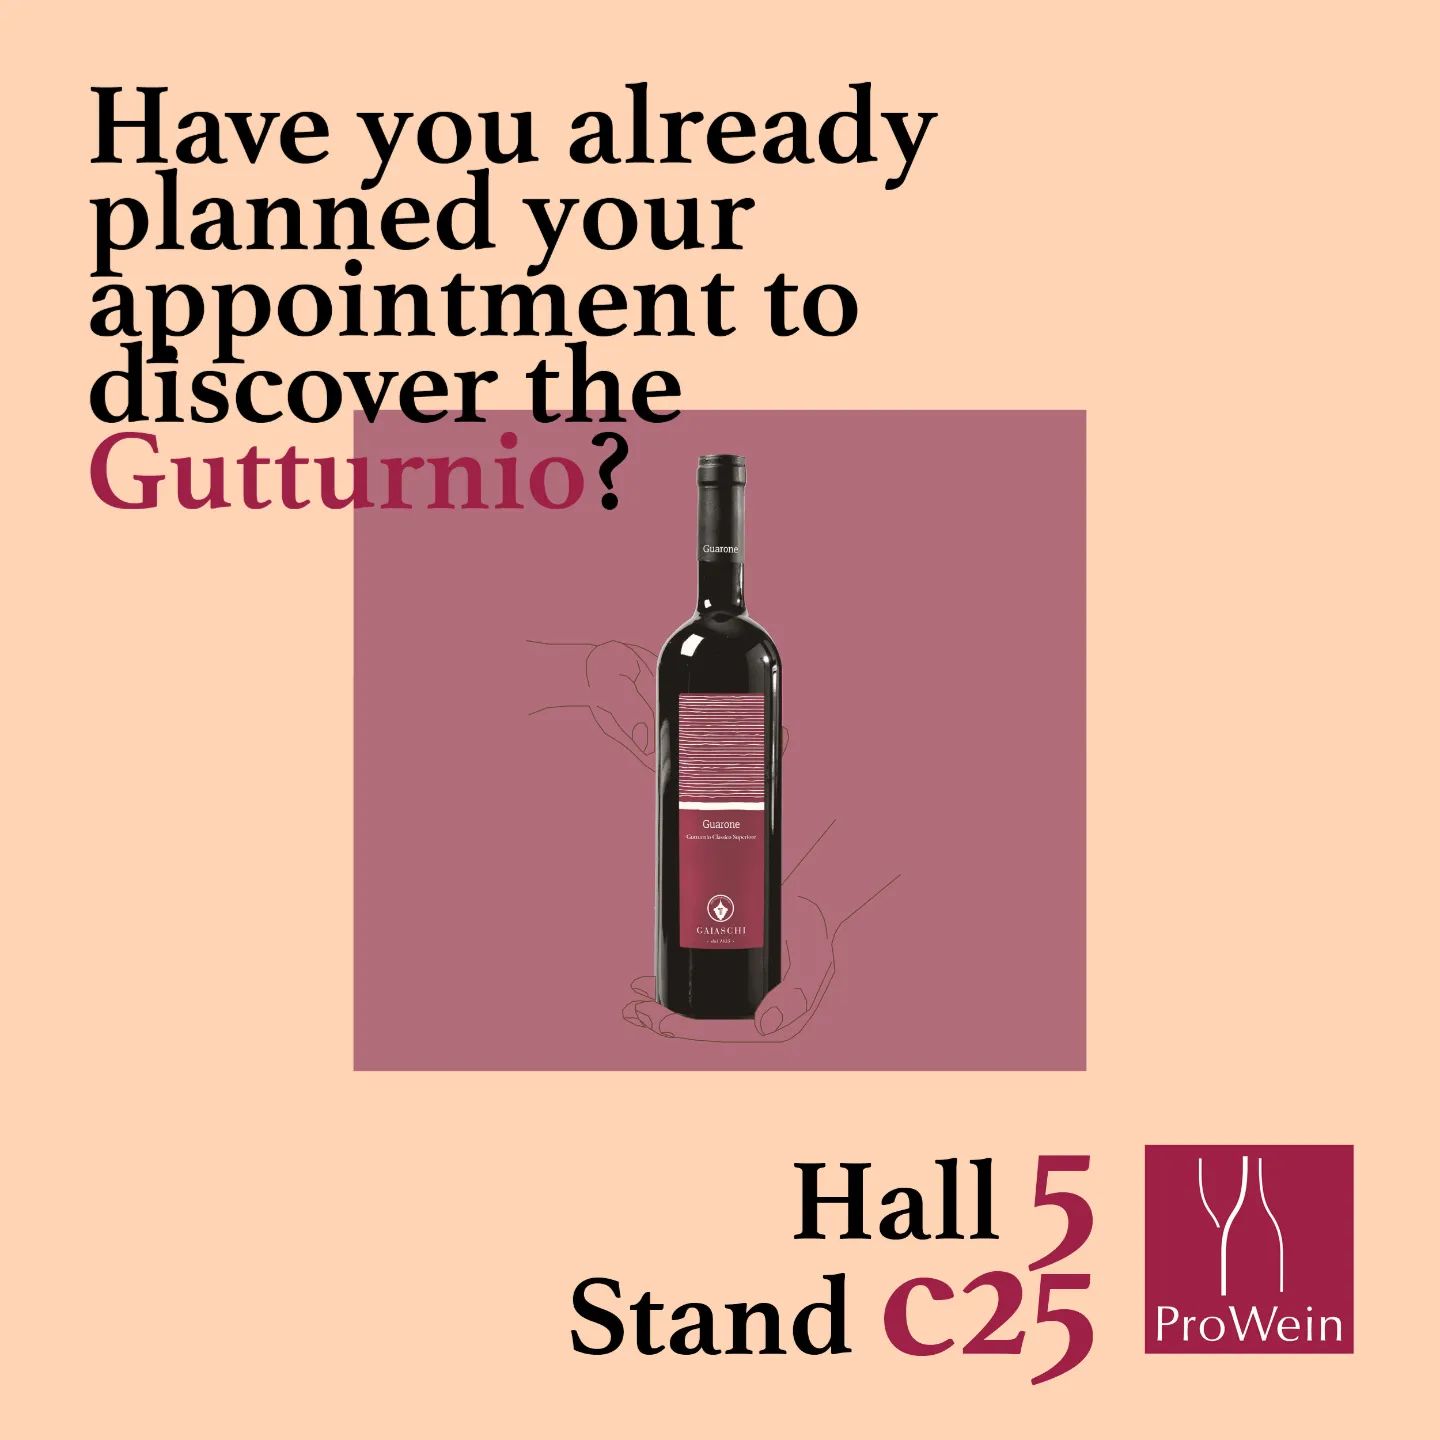 ProWein 22 is coming up!

Why should you come visit us?

➡️ First time at ProWein, but we have been around for more than 150 years
➡️ We'll be the only winery there from Colli Piacentini
➡️ Discover new wines your competitors don't have
➡️ Set a trend with Colli Piacentini wines

Just write me in direct if you wanna meet up at Hall 5 - Stand C25!

#iobevogaiaschi
#prowein
#cheersprowein
#endlichwiedermesse
#finallytradefair
#düsseldorf
#gutturnio #vinopiacentino #zianopiacentino #valtidone #collipiacentini #piacenza #vinoitaliano #wein #wine #winelover #winetasting #instawine #winetime #vino #italianwine #fivi #passionwine #winepassion #guarone